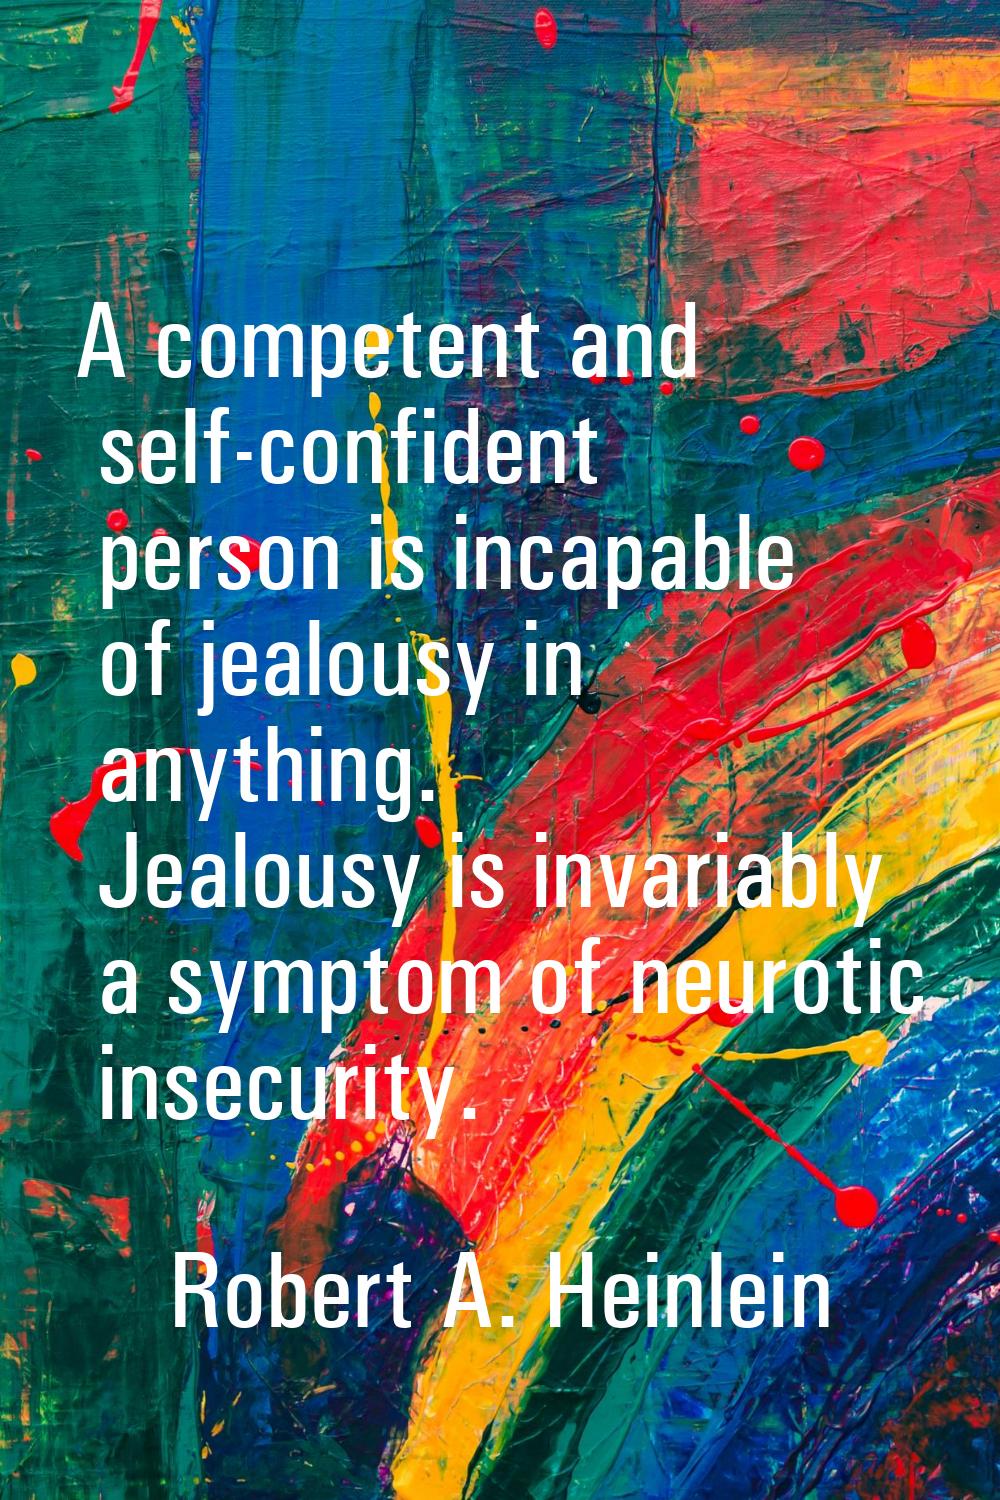 A competent and self-confident person is incapable of jealousy in anything. Jealousy is invariably 